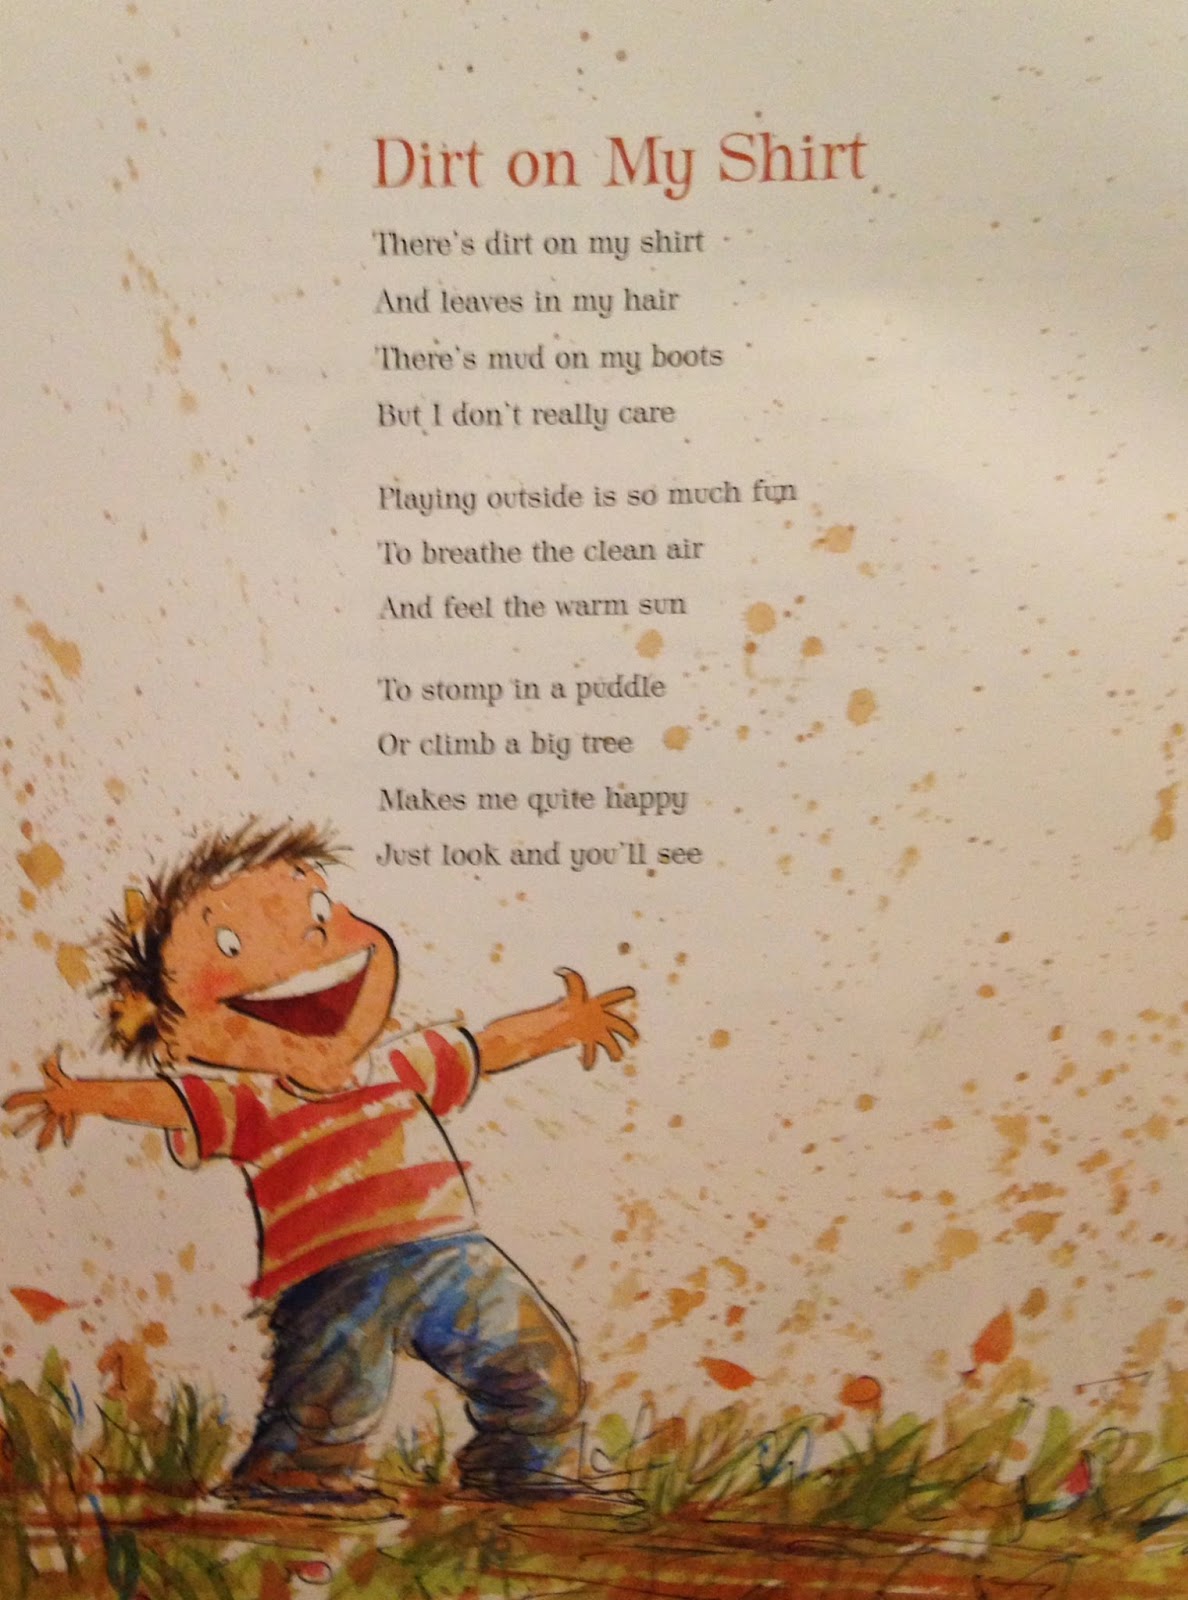 In one section of the book there is a series of poems about super silly fam...